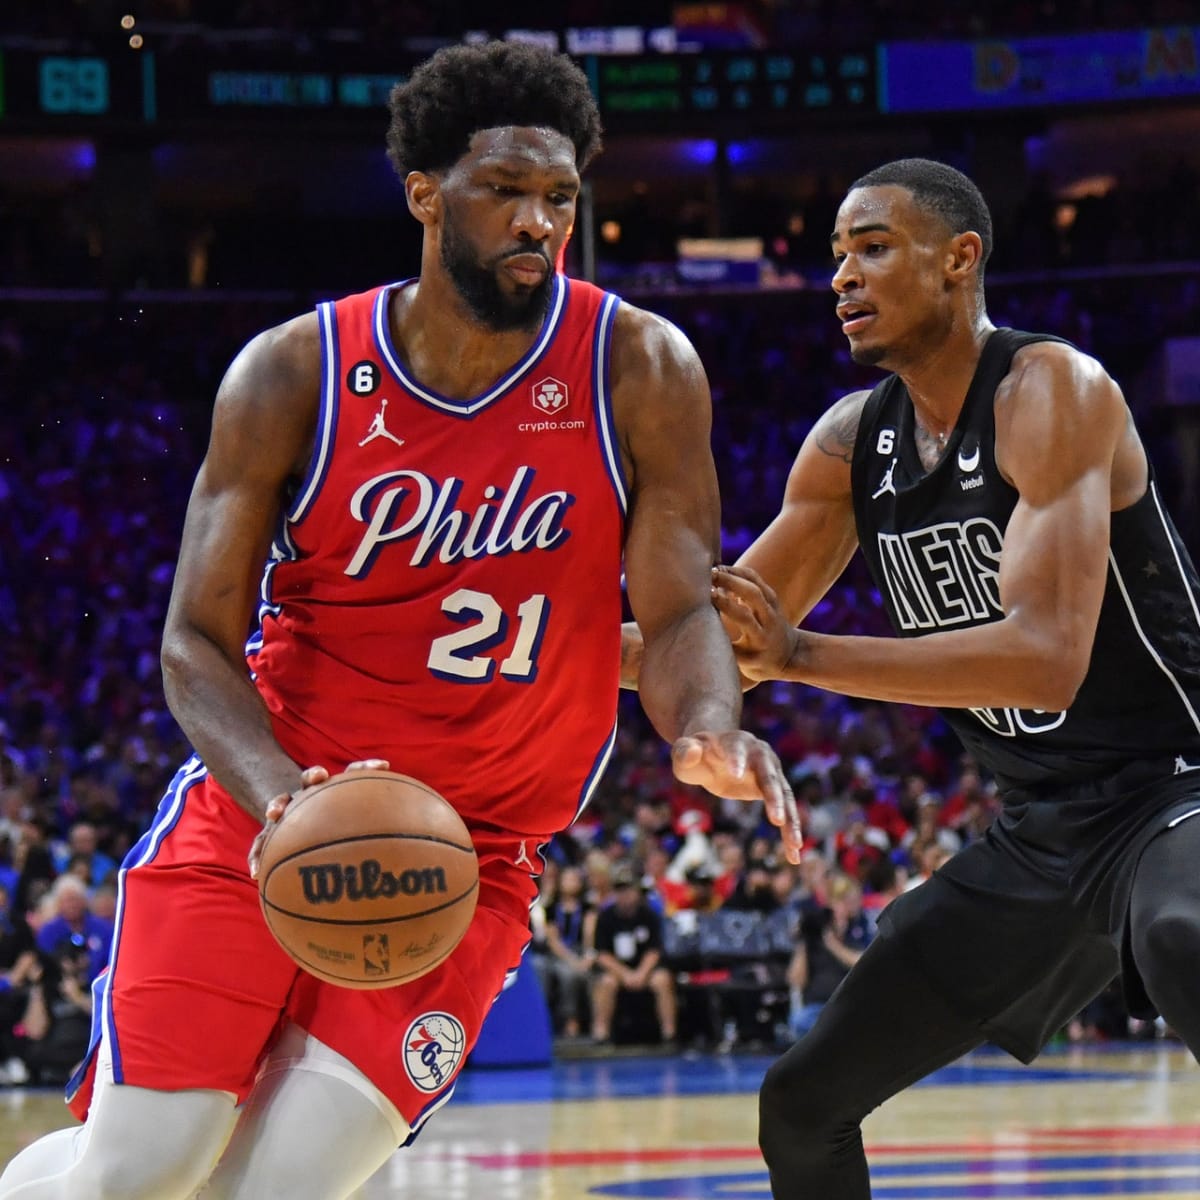 Game 1 of Round 1 for Sixers vs. Nets set for April 15 at 1 p.m. ET